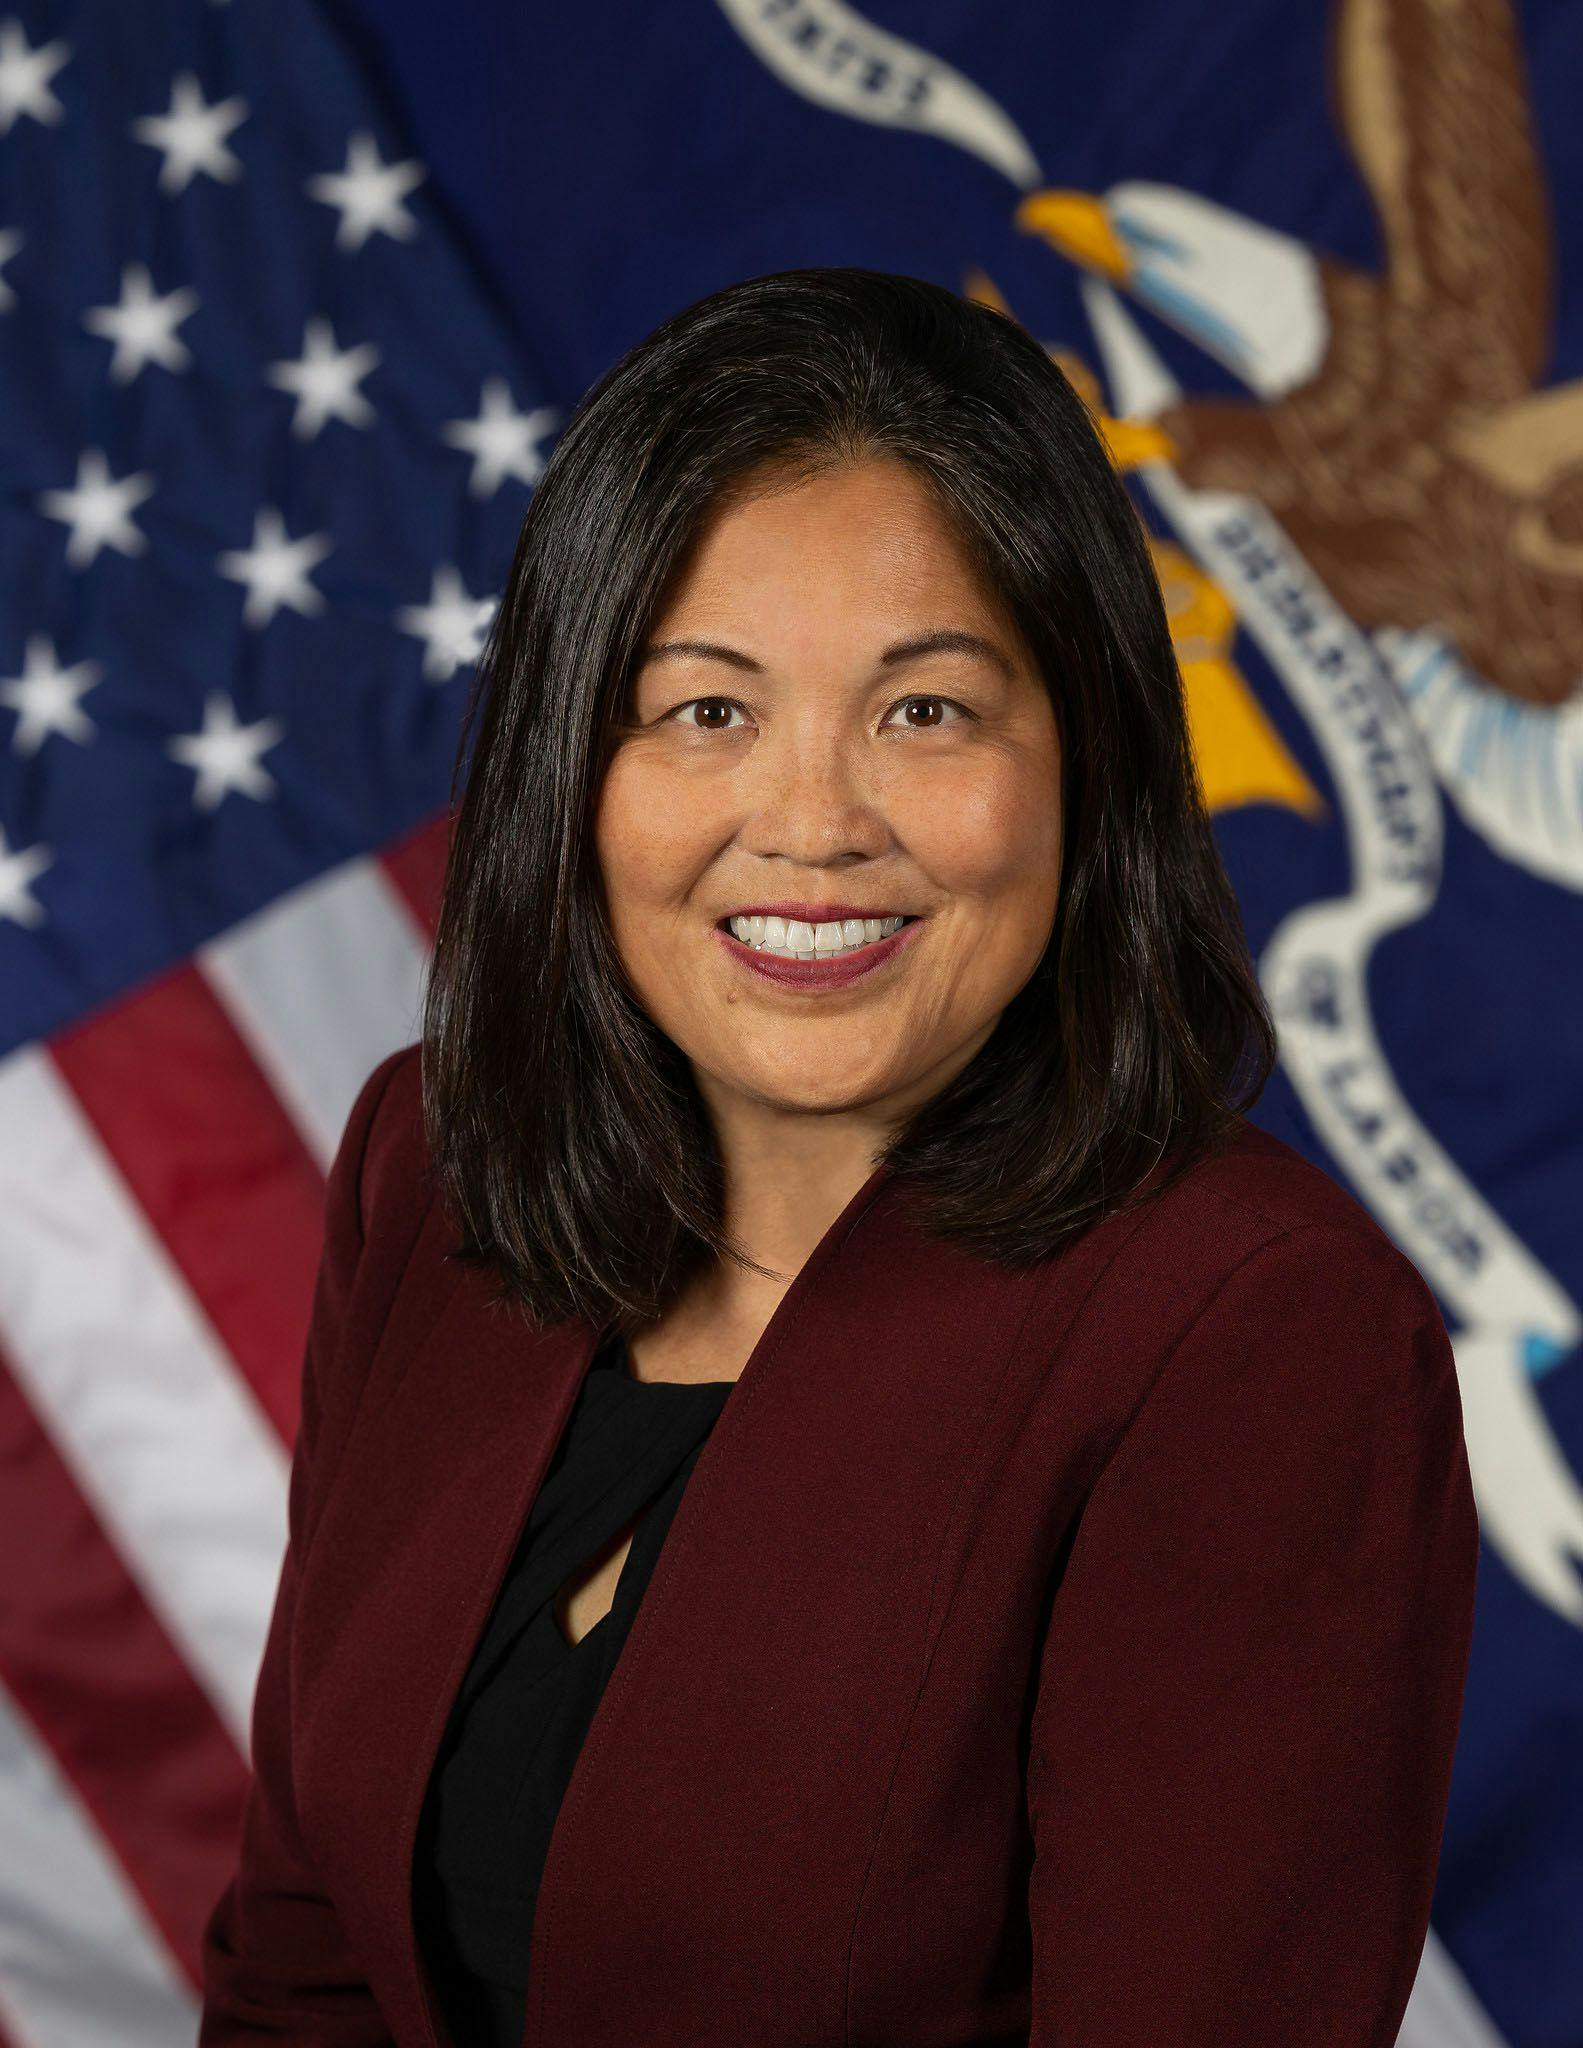 Acting U.S. Labor Secretary Julie Su played an important role in getting a deal done. (Image: U.S. Department of Labor)